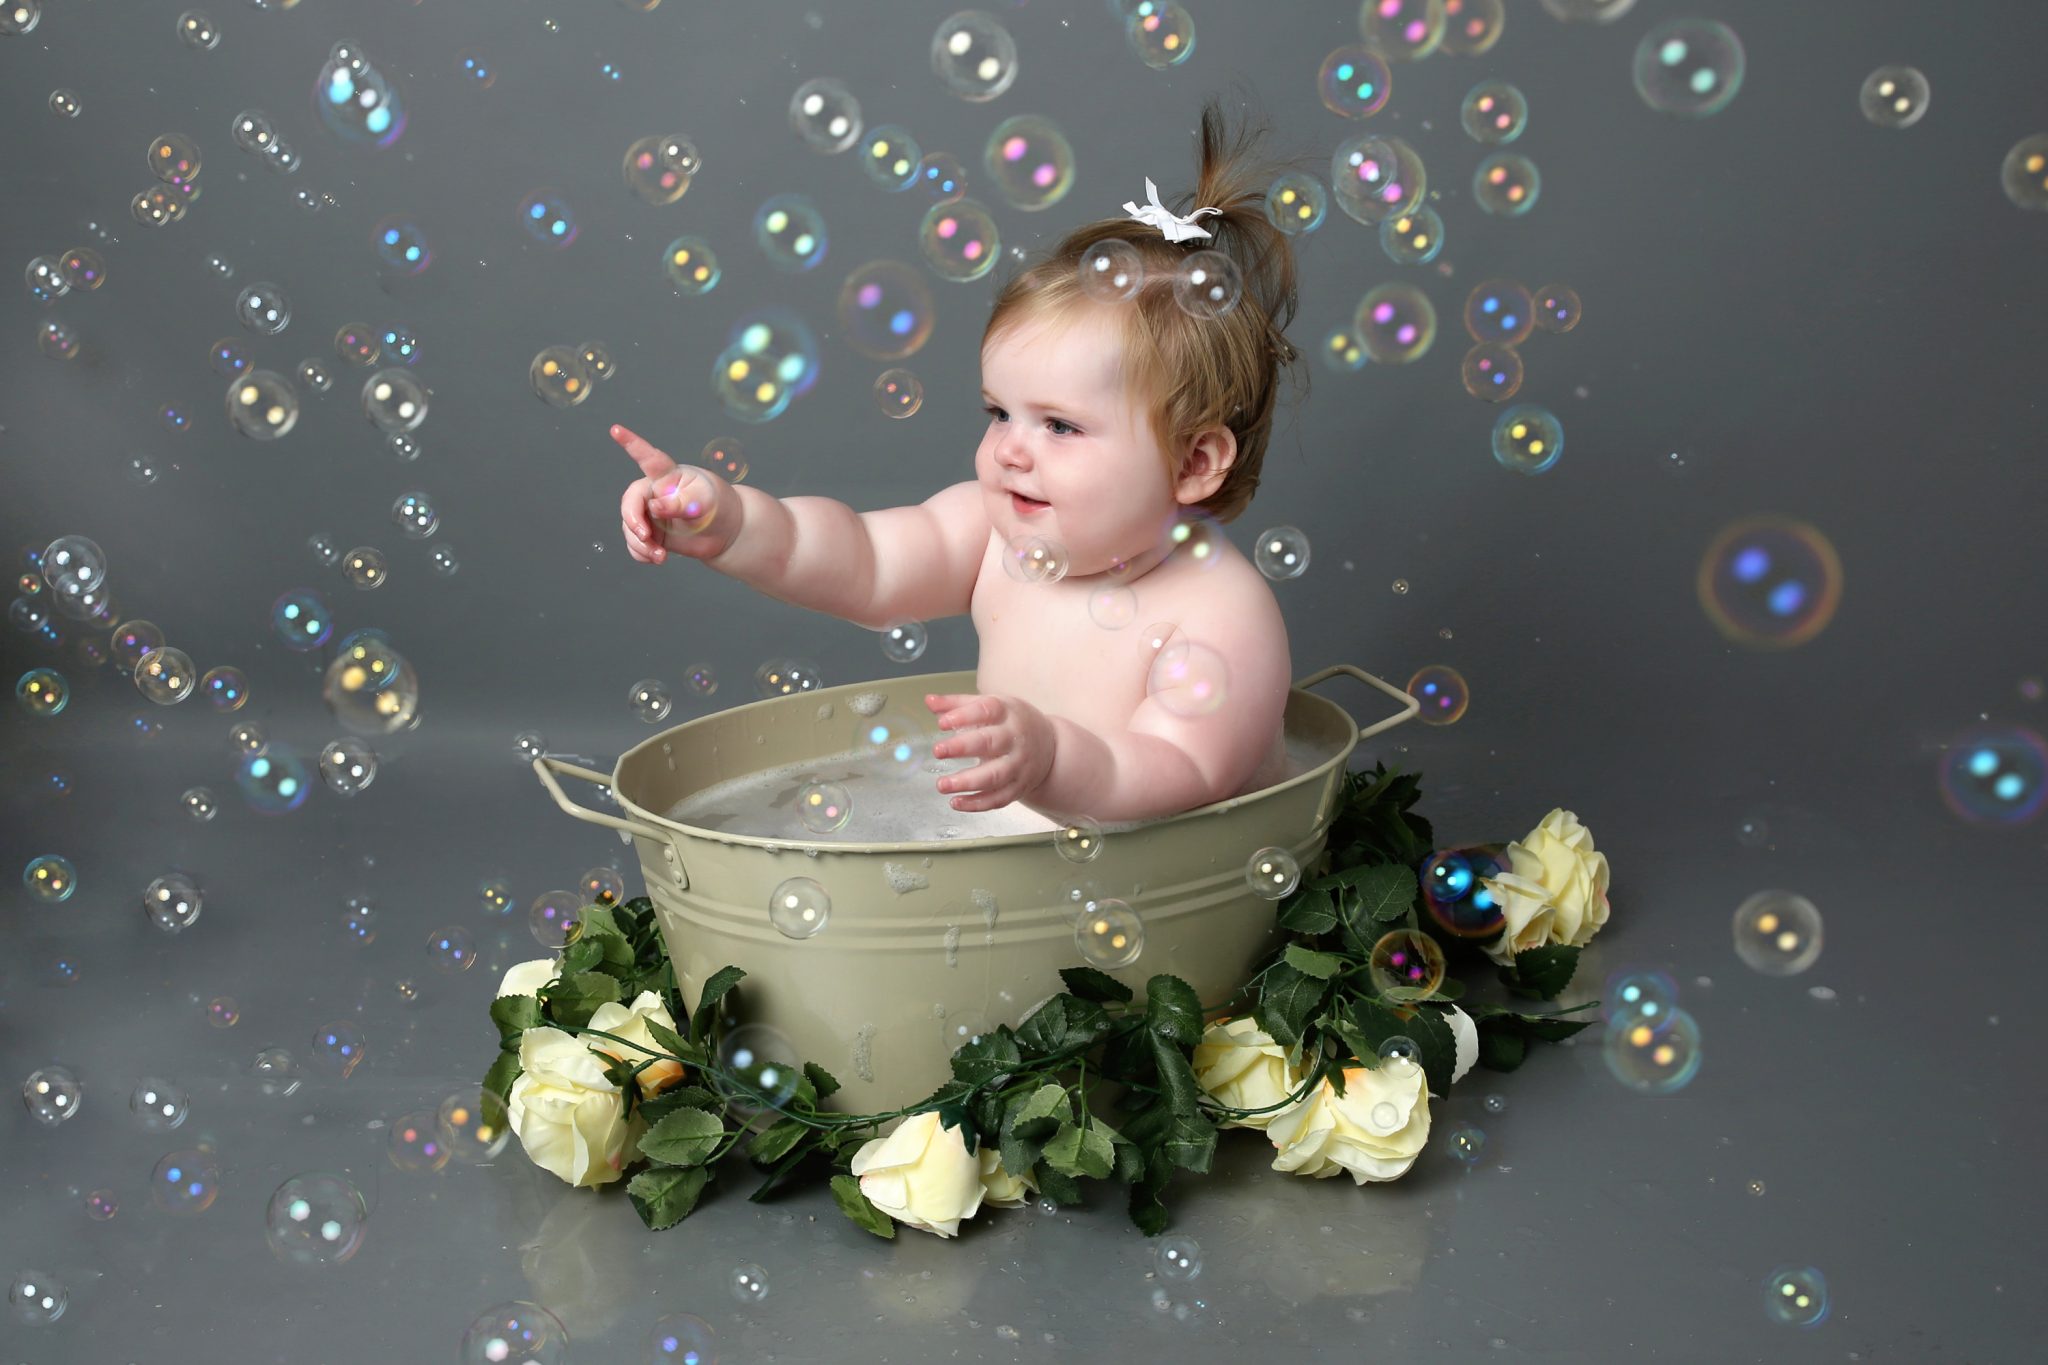 Little girl popping bubbles in bath tub with floral prop at cake smash photoshoot West Sussex